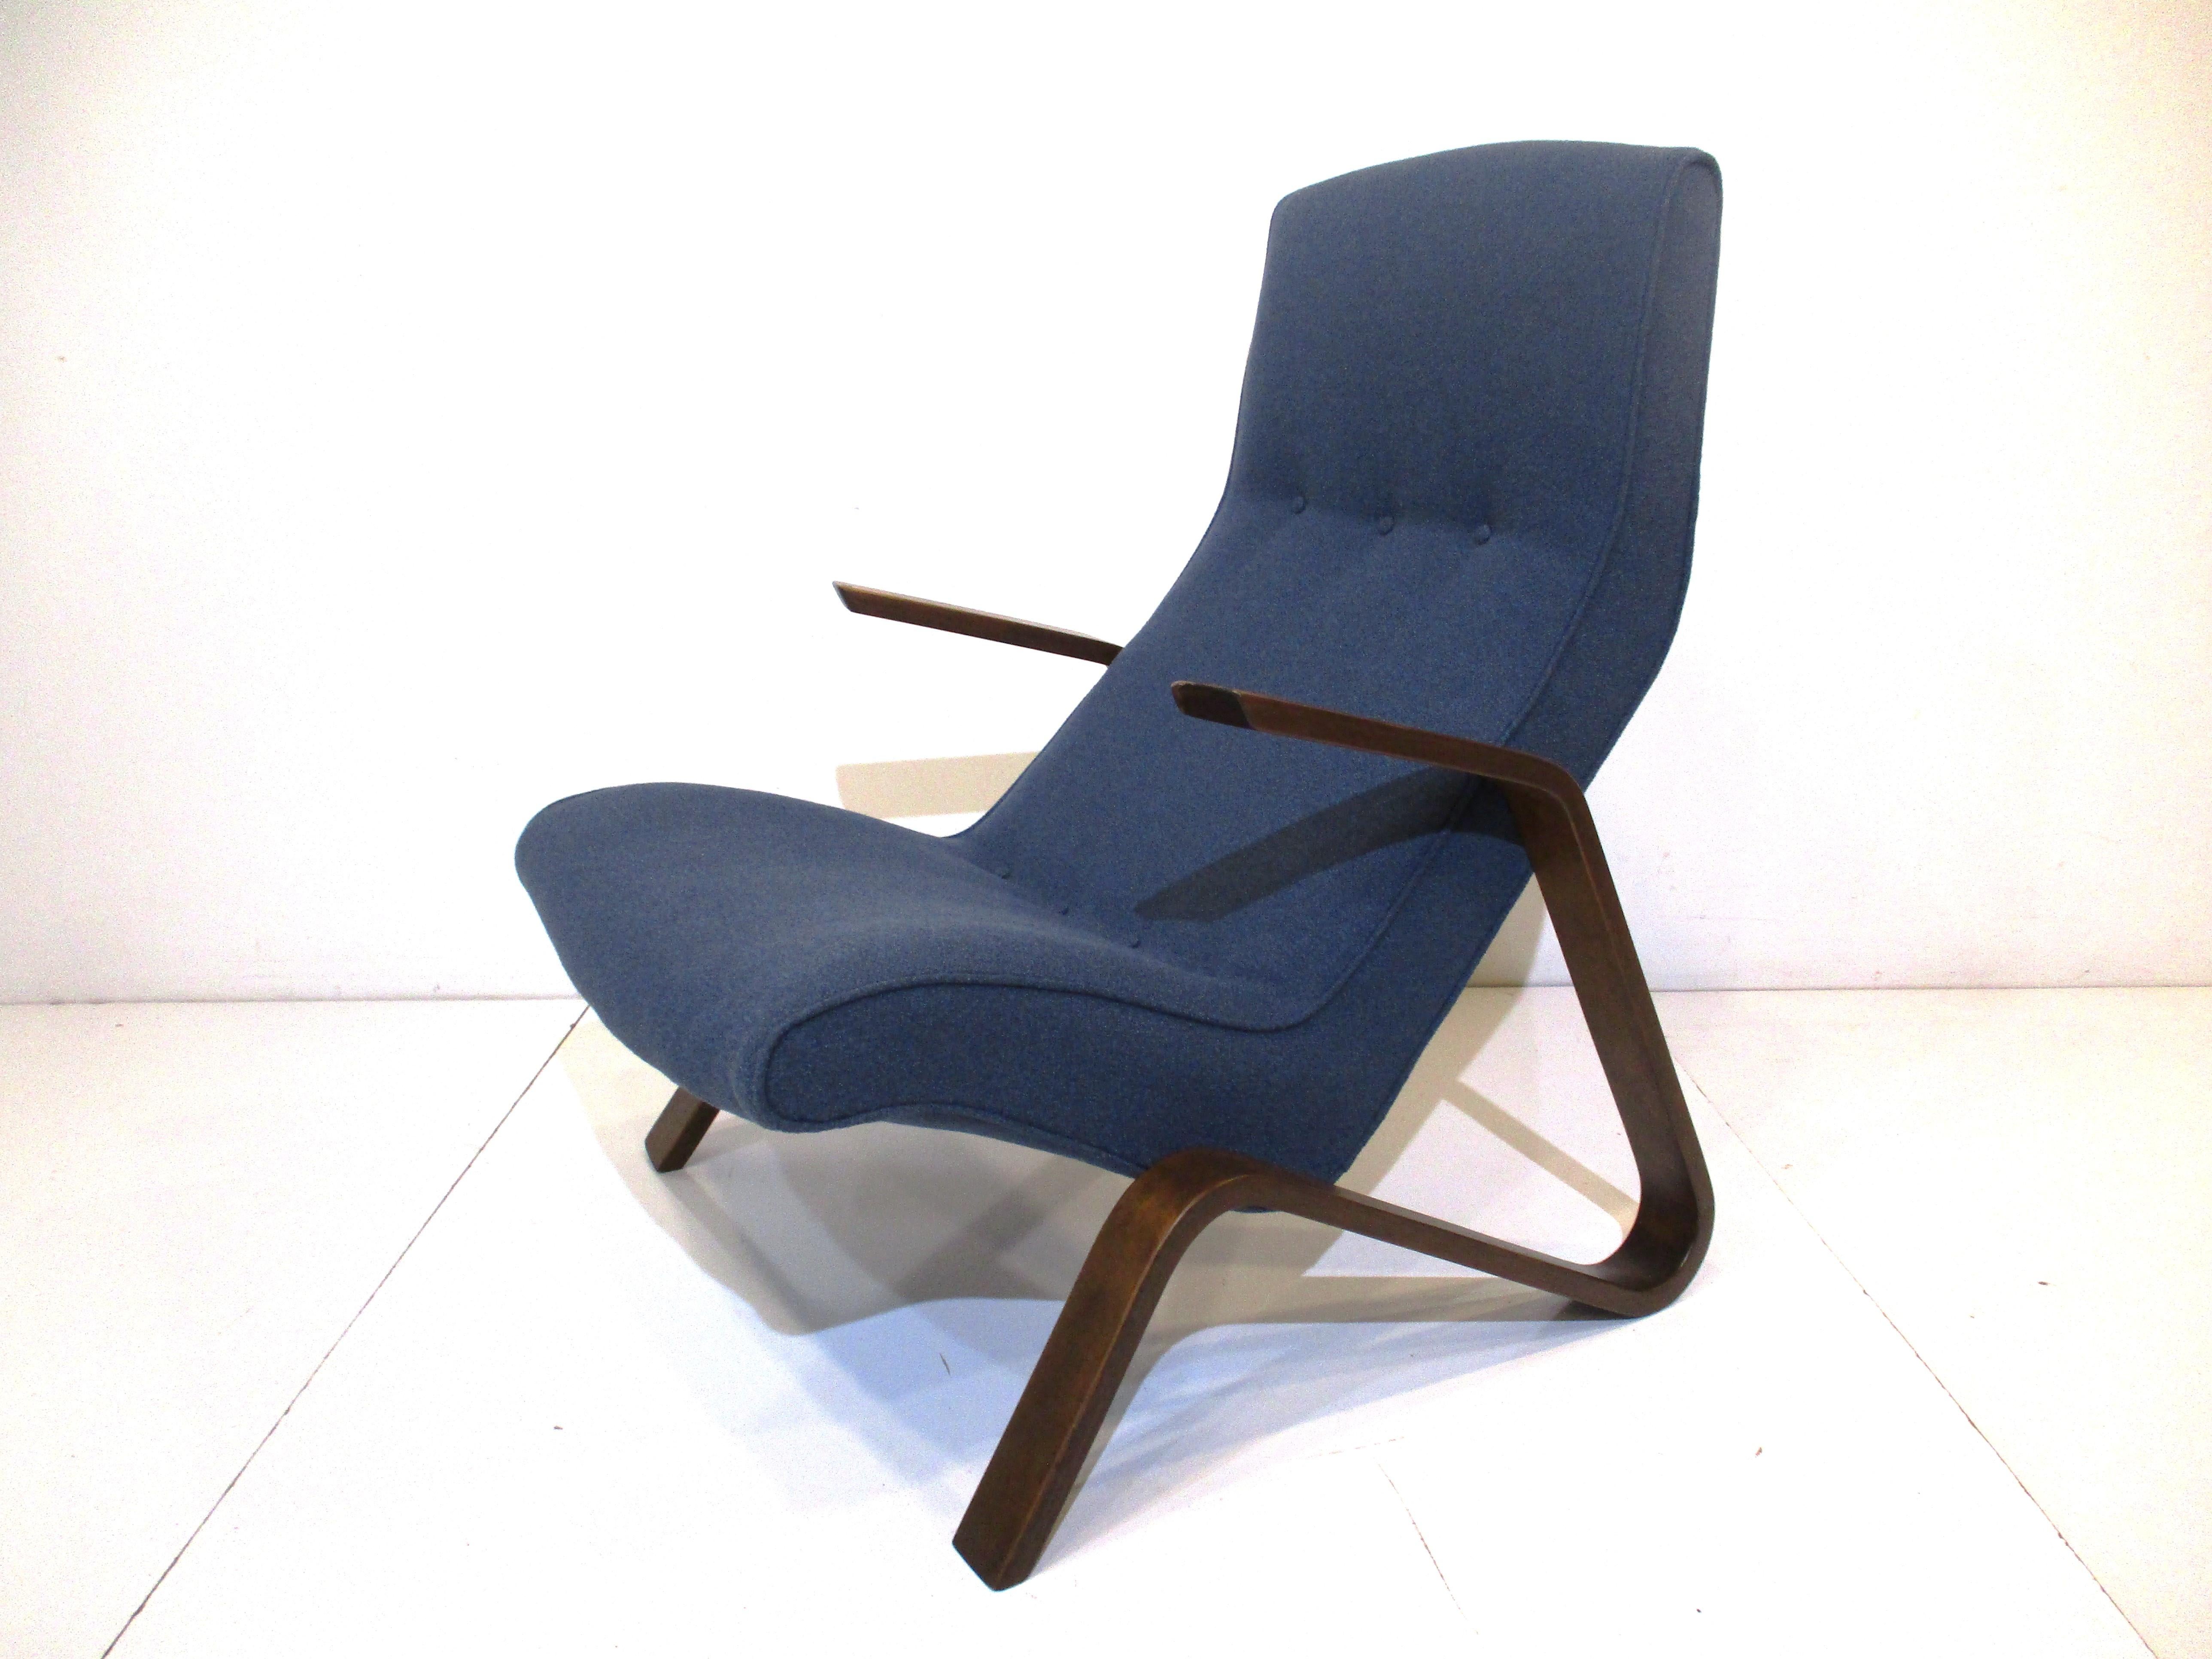 A classic vintage grasshopper lounge chair in a dark blue gray contract fabric with dark walnut toned sculptural arms and legs. This was one of the first super comfortable chairs that was intentionally ergonomically designed by artist, furniture